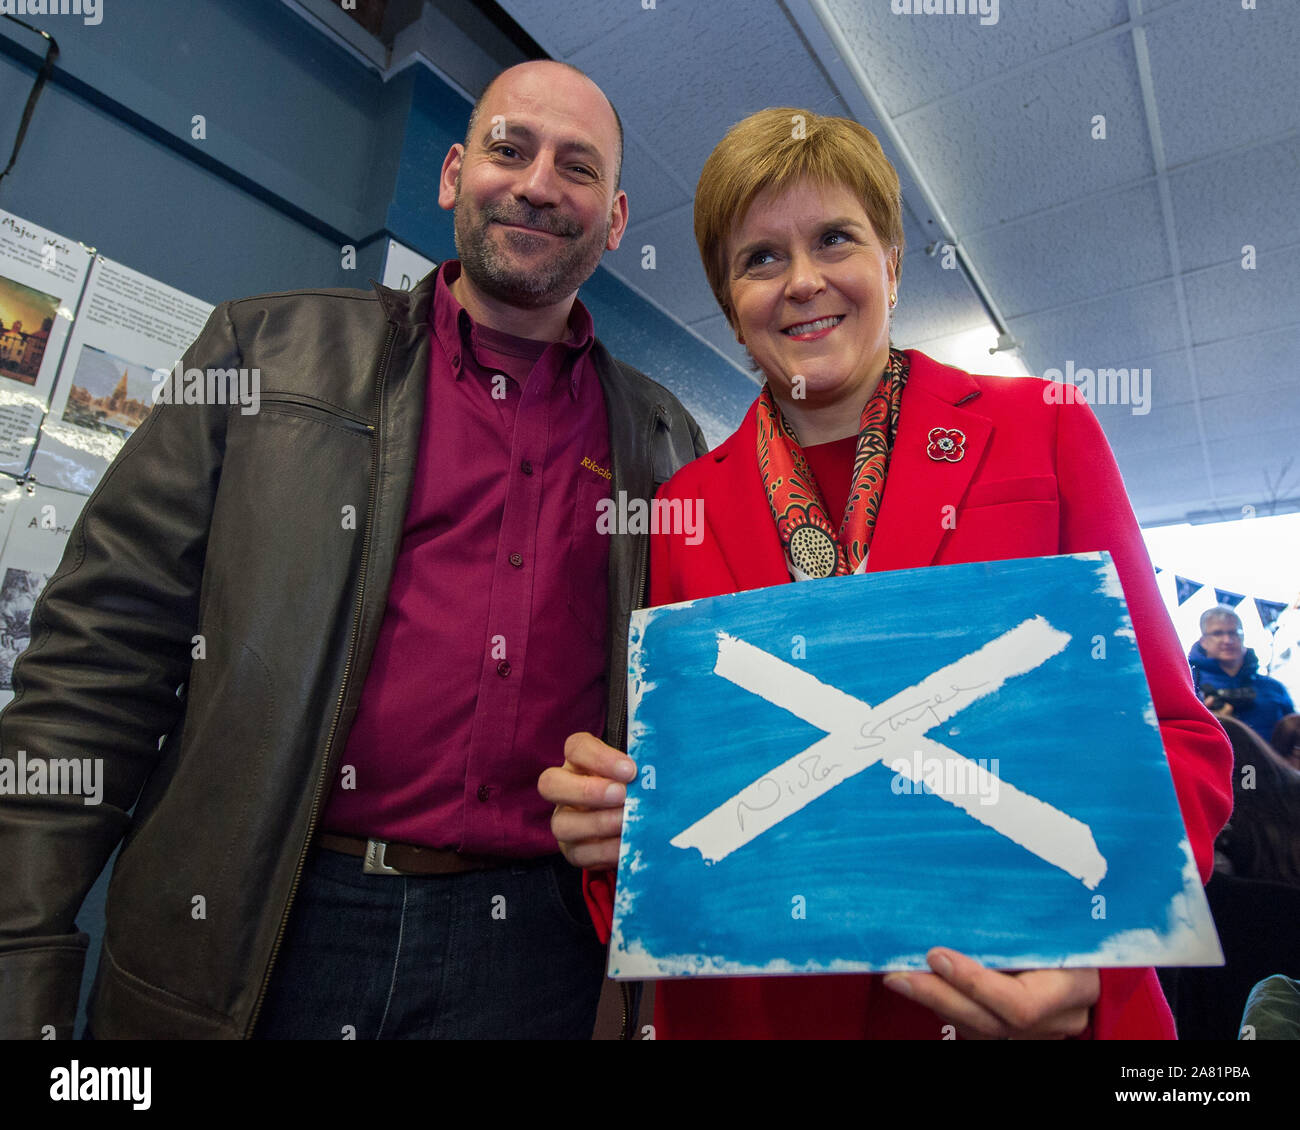 Dalkeith, UK. 5 November 2019. Pictured: (left) Carlo Riccio - Owner of the Riccio Gallery; (right) Nicola Sturgeon MSP - First Minister of Scotland and Leader of the Scottish National Party (SNP).  First Minister Nicola Sturgeon joins Owen Thompson, SNP candidate for Midlothian, to campaign in Dalkeith. Speaking ahead of the visit, Nicola Sturgeon said: “Brexit is far from a done deal.”  “Even if Boris Johnson was to get his deal passed, that would only be the beginning – not the end – of trade talks with the EU.”   Credit: Colin Fisher/Alamy Live News. Credit: Colin Fisher/Alamy Live News Stock Photo